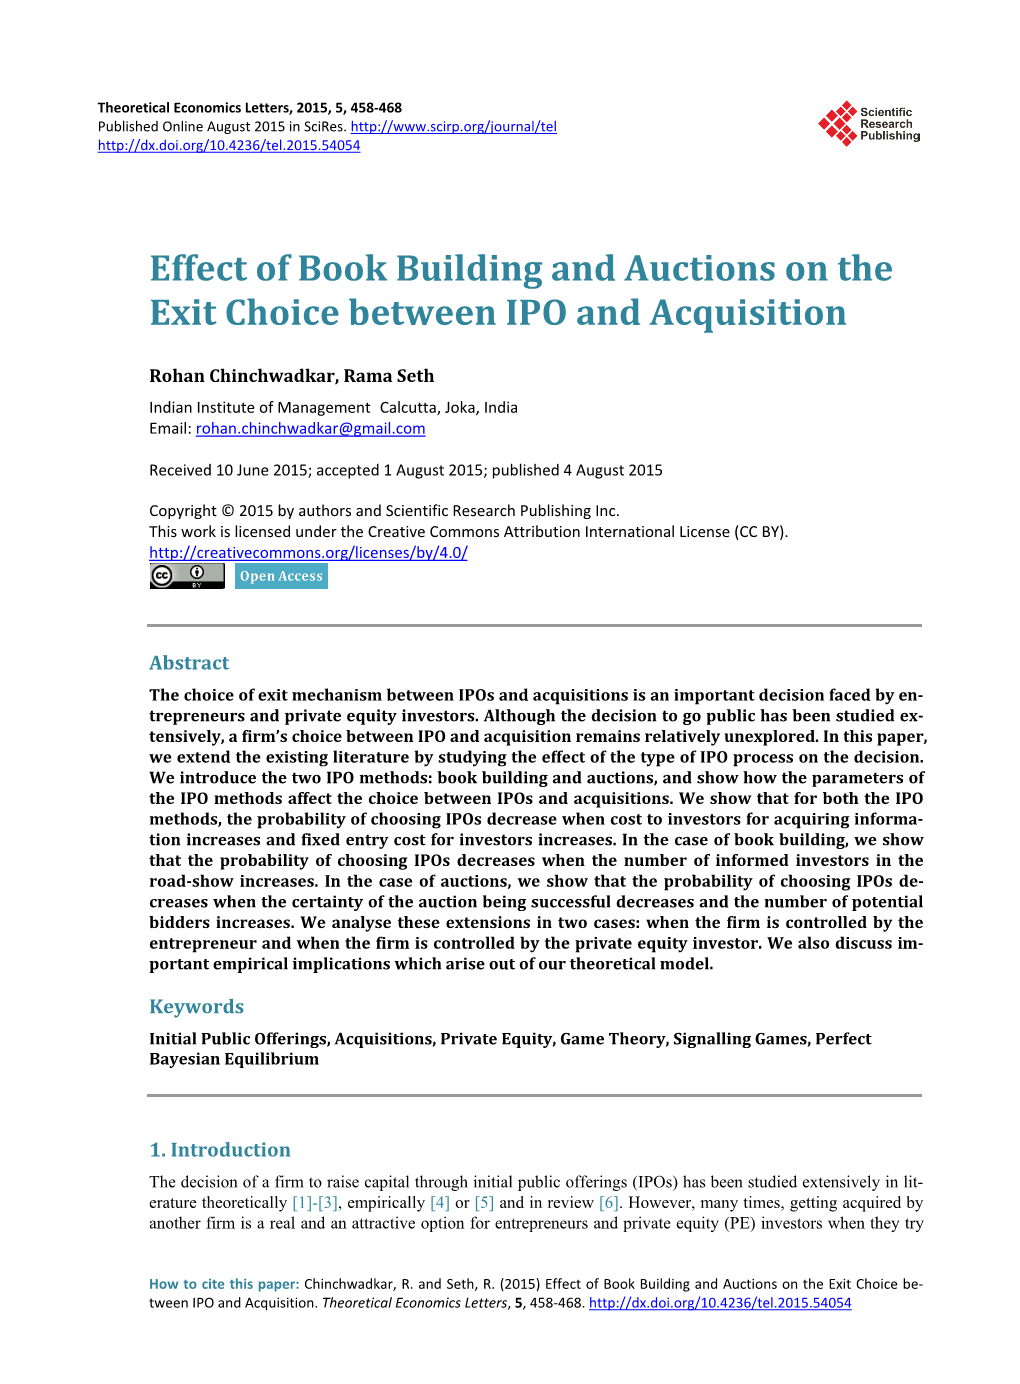 Effect of Book Building and Auctions on the Exit Choice Between IPO and Acquisition